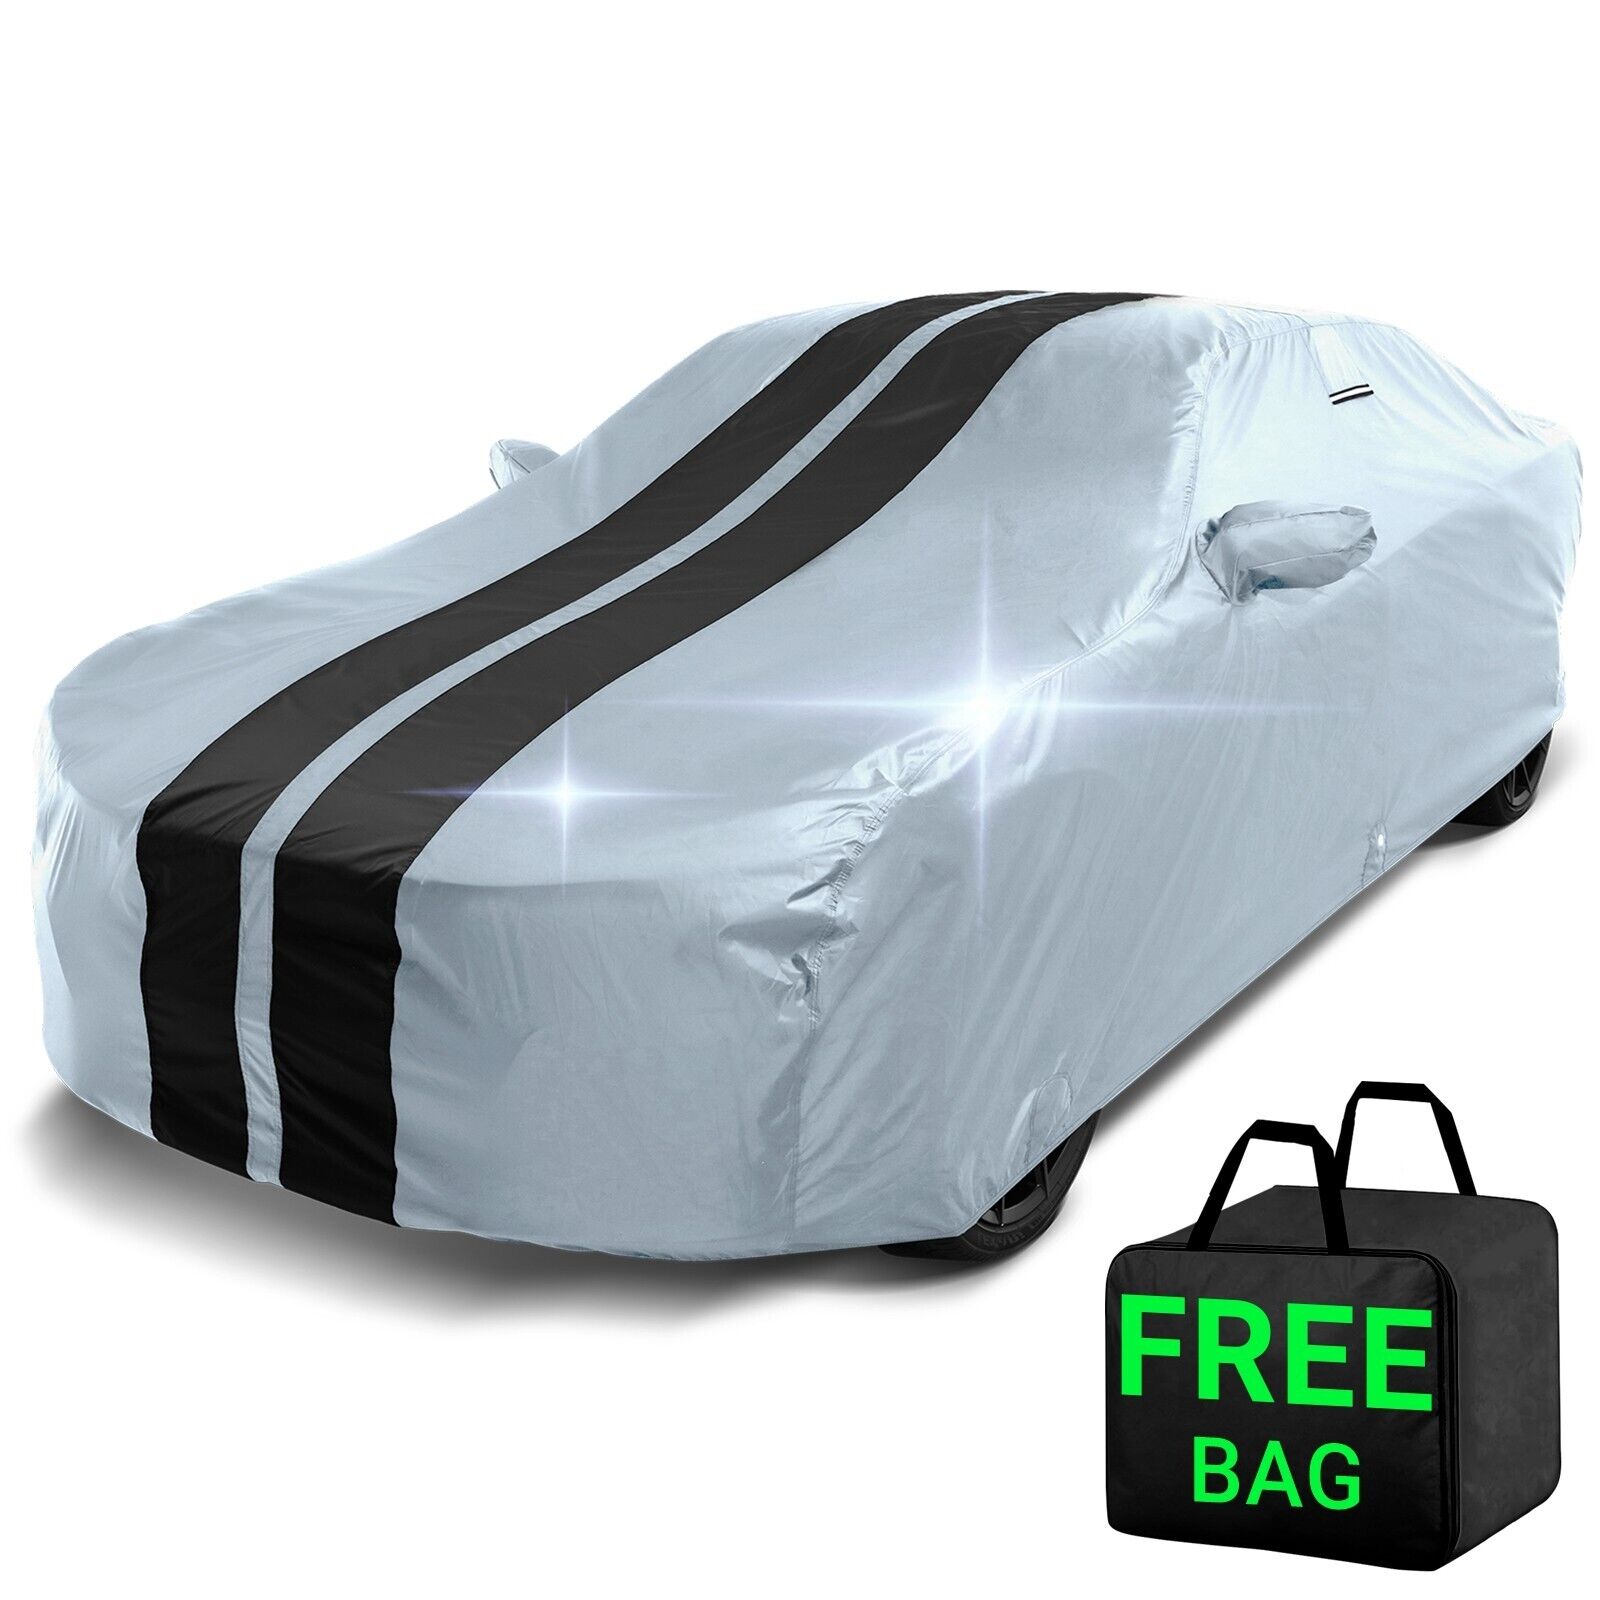 2012 Fisker Karma Custom Car Cover - All-Weather Waterproof Outdoor Protection